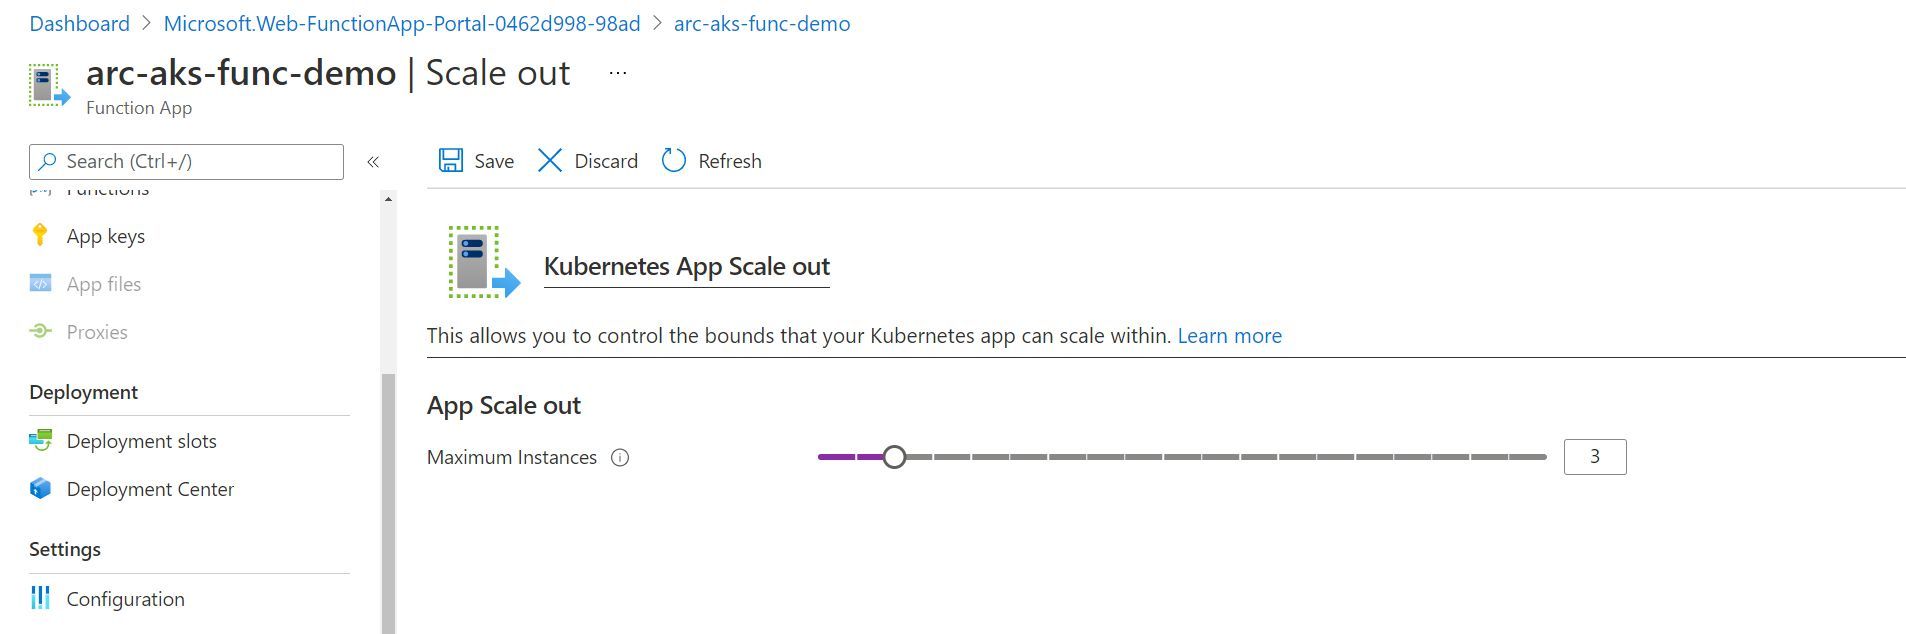 Screenshot showing the Scaling out Functionality for a Function App hosted in App Service on Kubernetes through Azure Portal